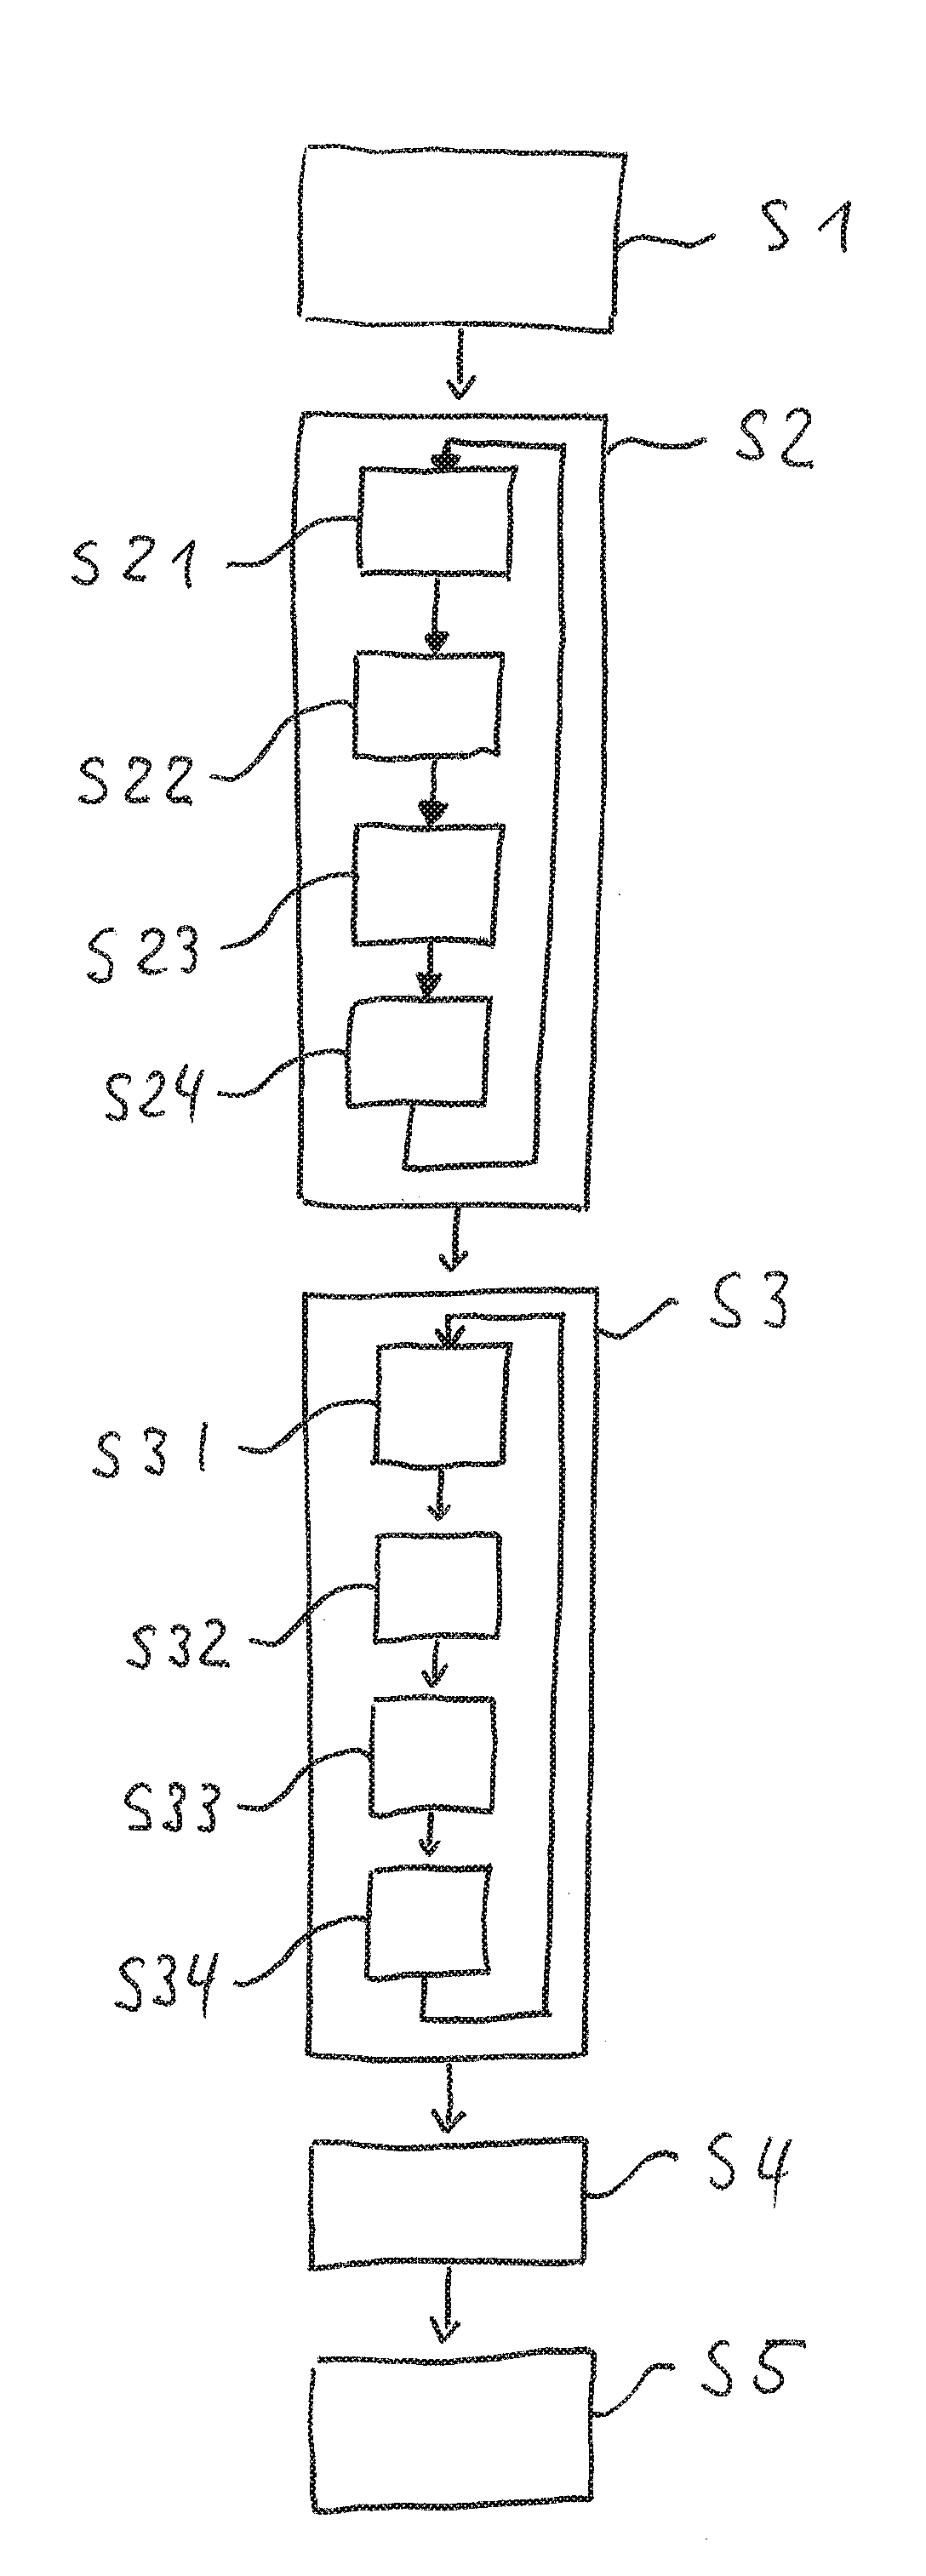 Method and apparatus for deriving a perceptual hash value from an image